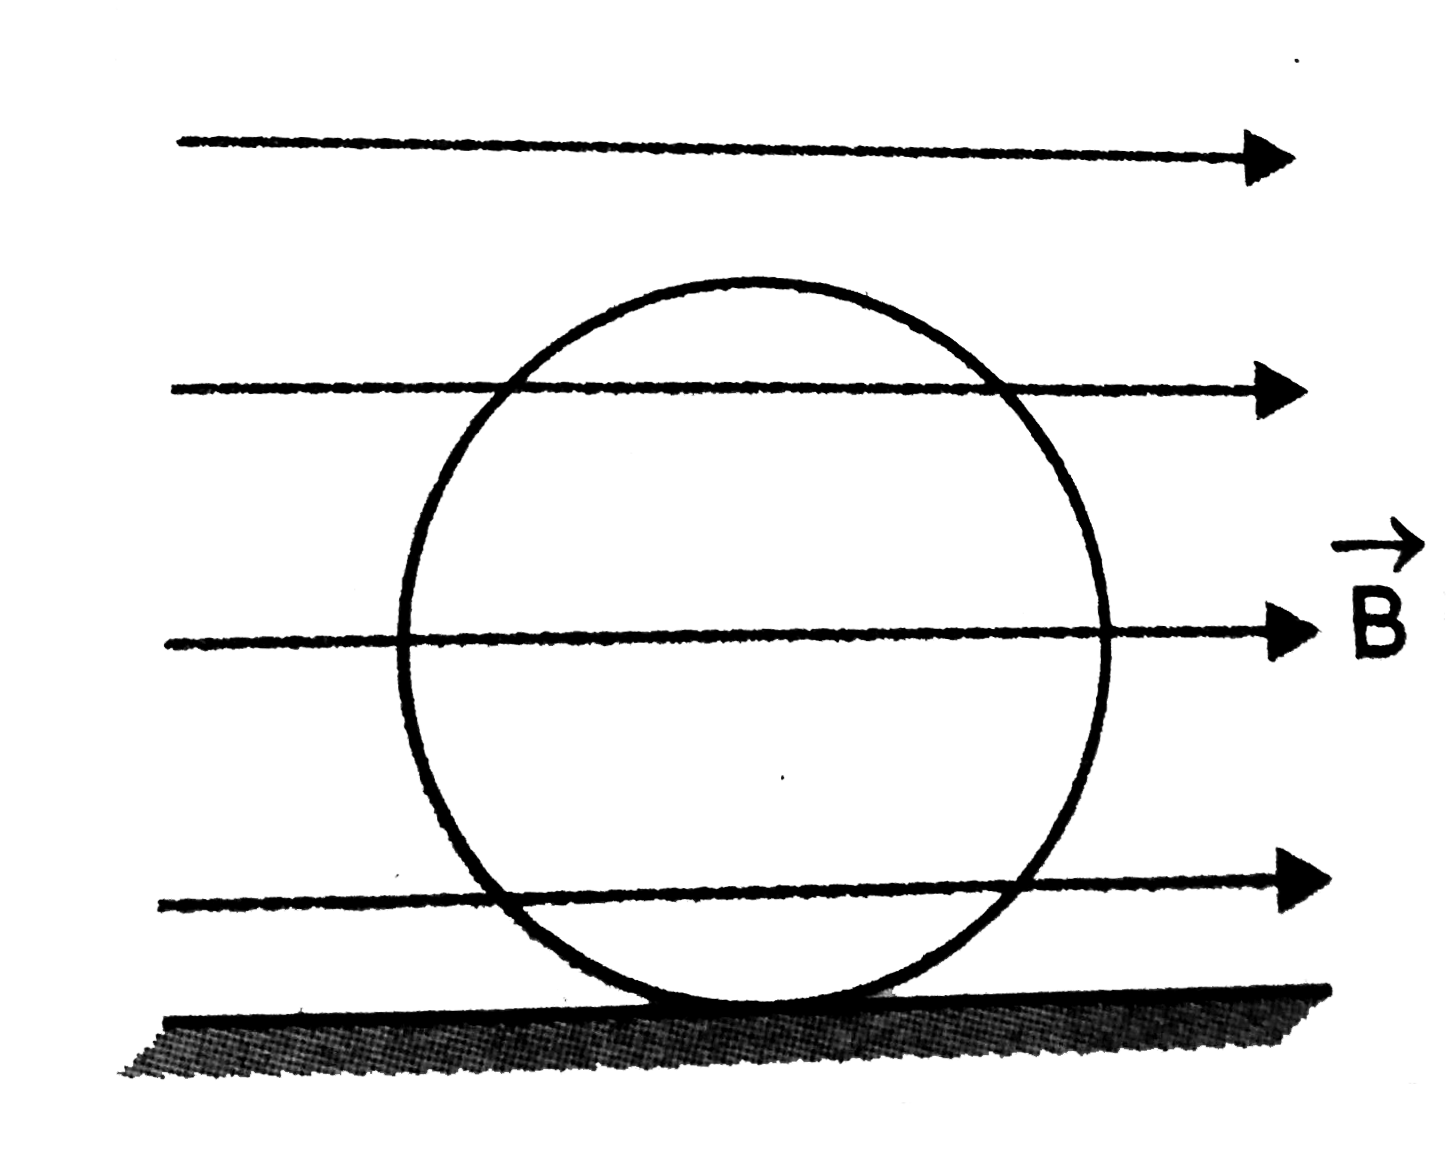 A conducting rign of mass 100 gram and radius 0*5m is placed on a smooth horizontal plane. The ring carries a current of I=4A. A horizontal magnetic field B=10T is switched on at time t=0 as shown in figure. The initial angular acceleration of the ring is